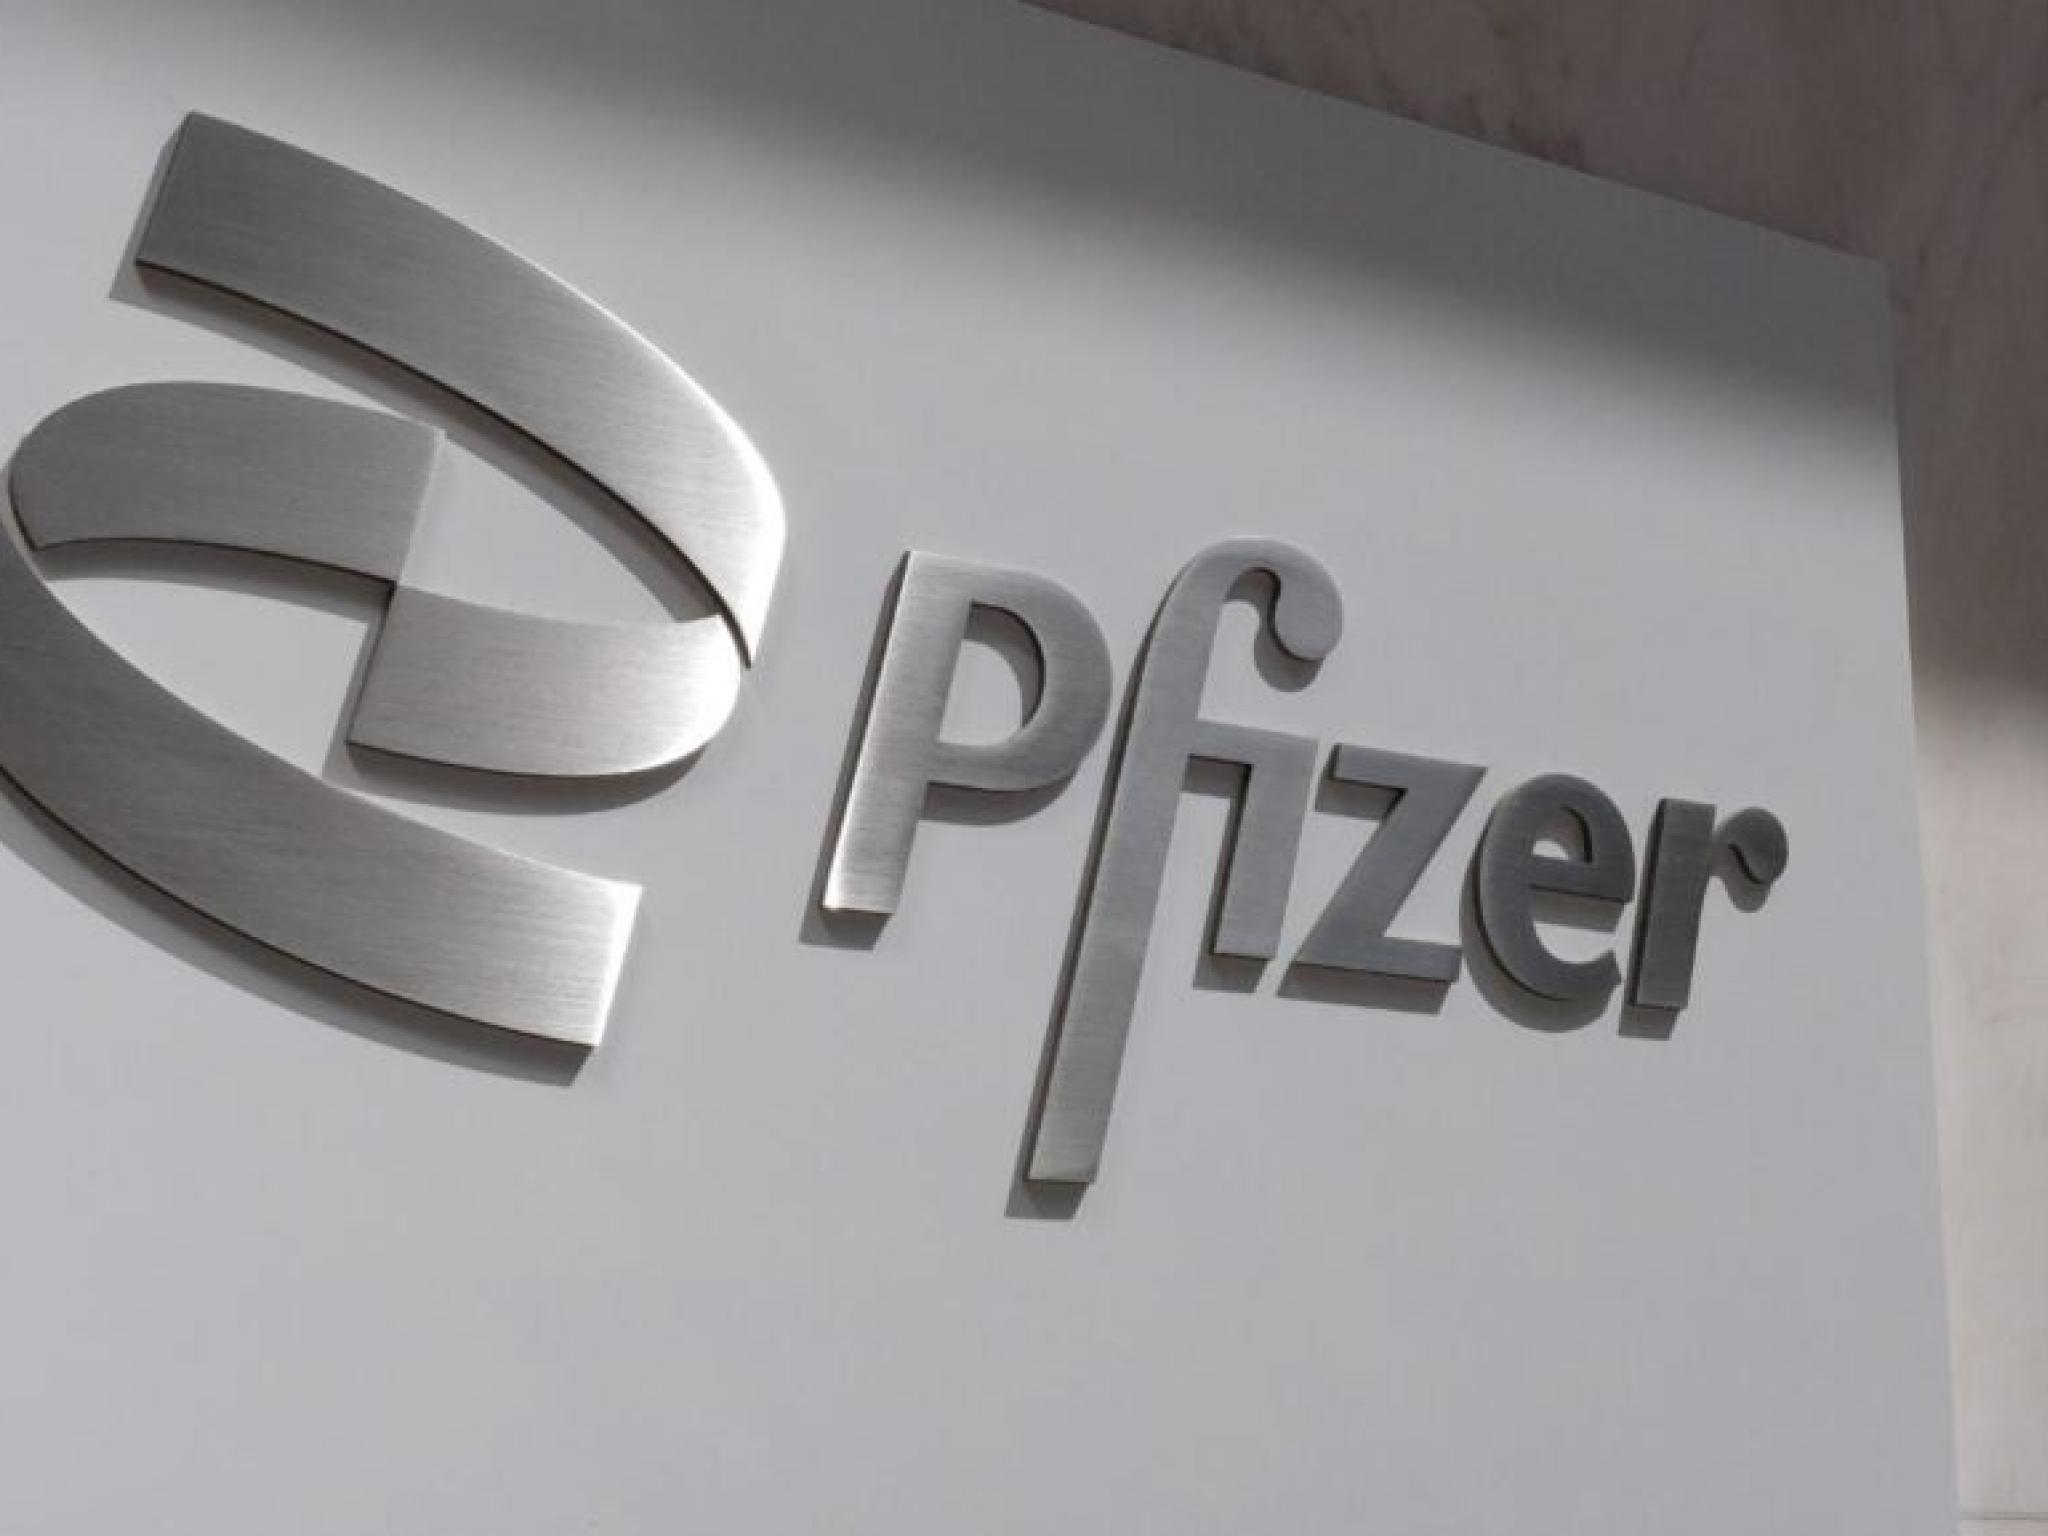  pfizer-settles-zantac-lawsuits-agrees-to-250m-settlement-to-reduce-liability-report 